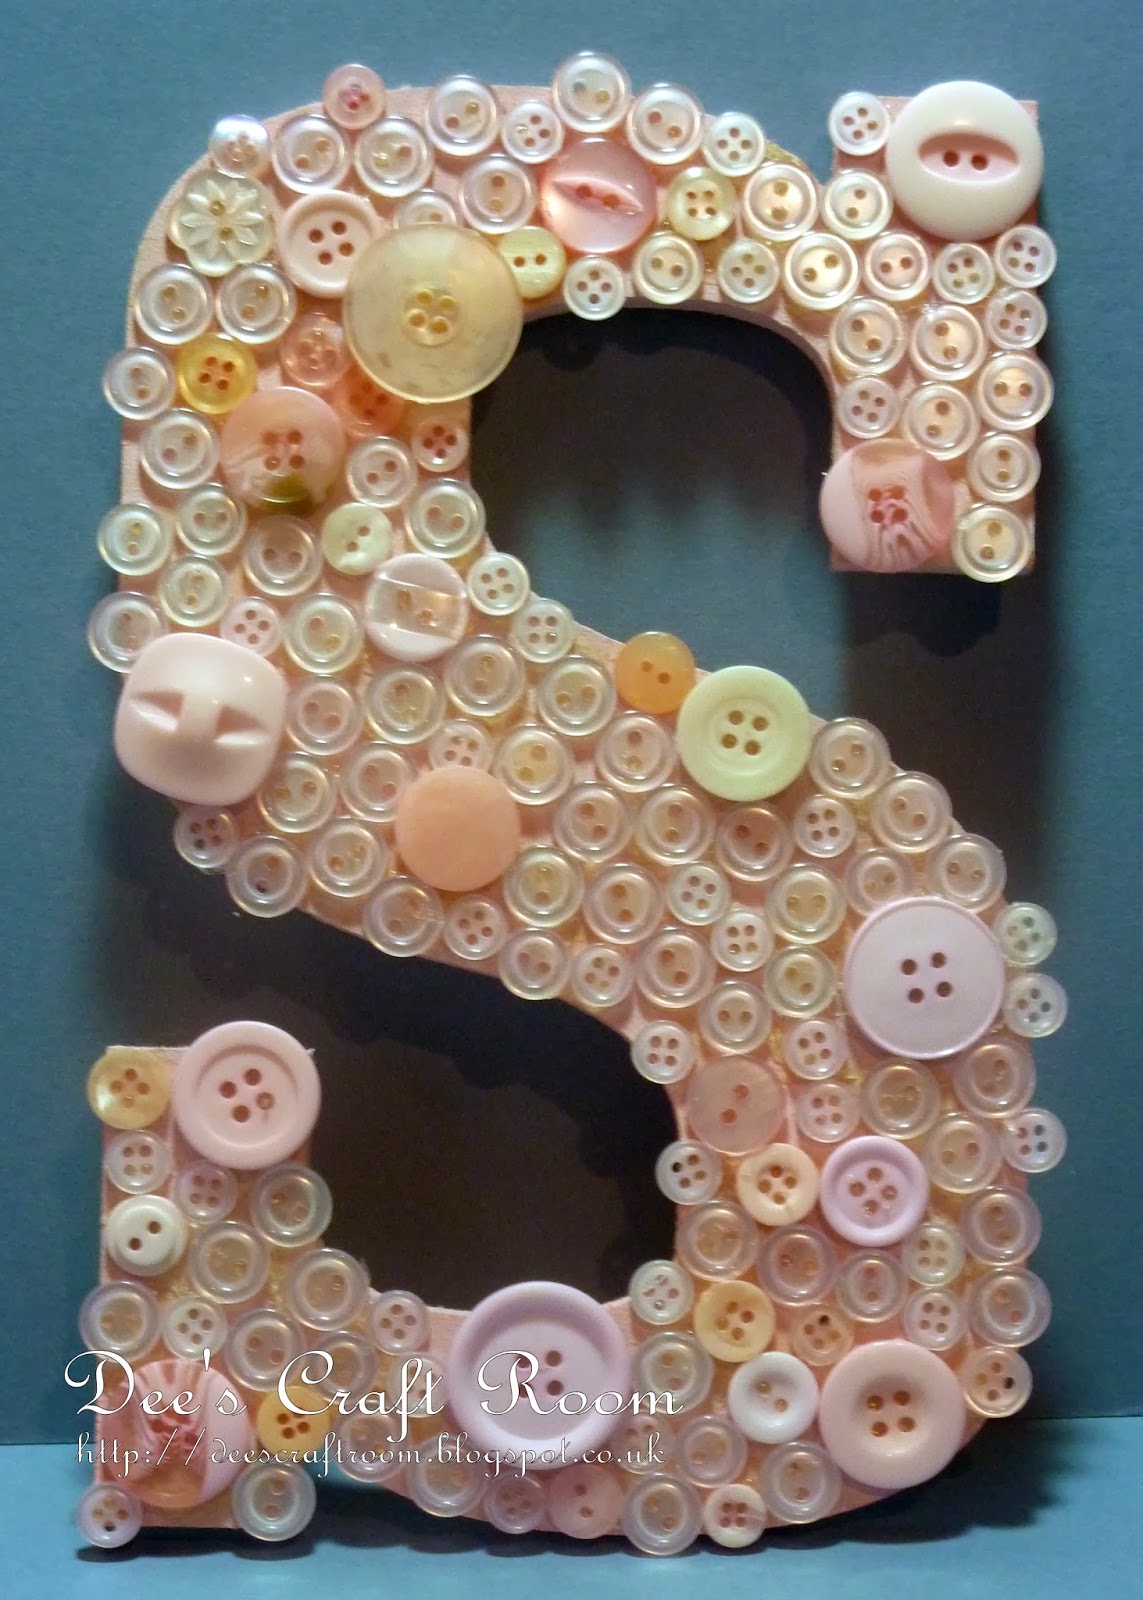 Dee's Craft Room: Letter S